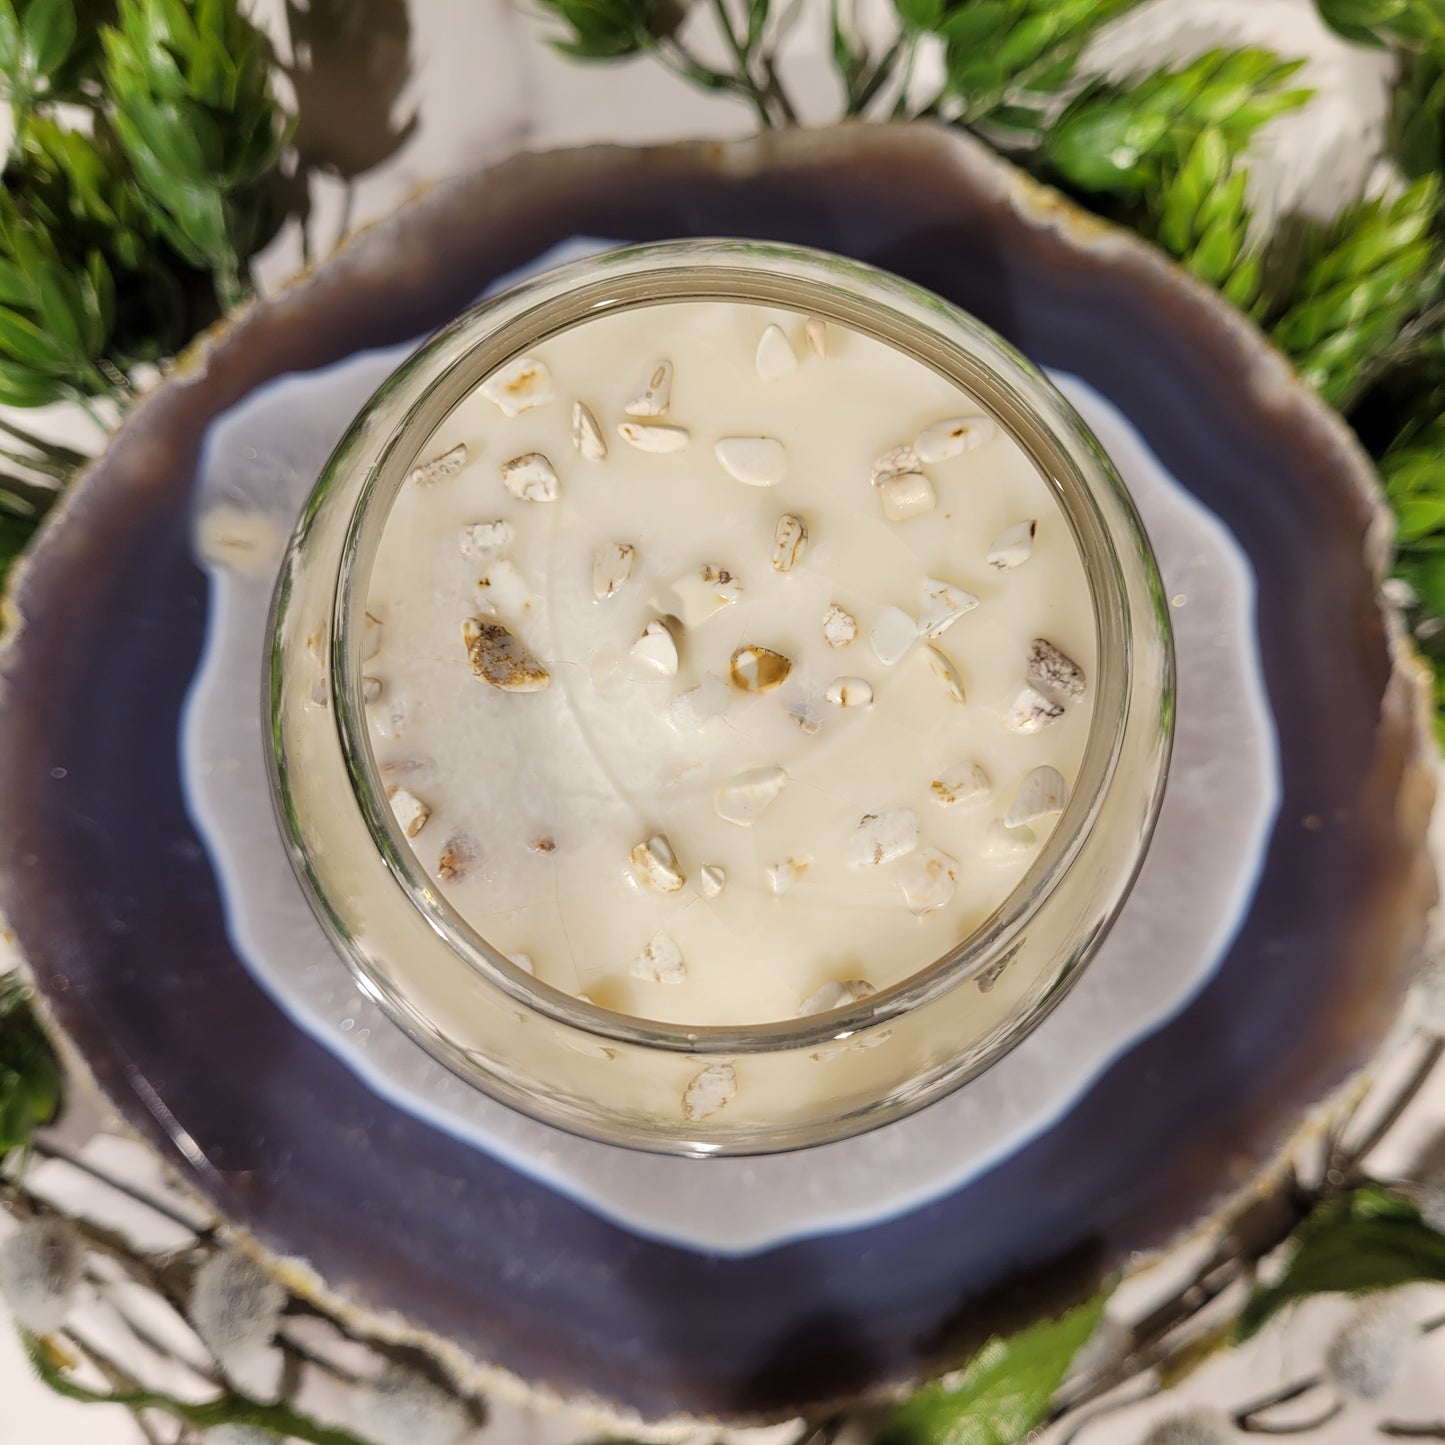 White Birch Soy Candle